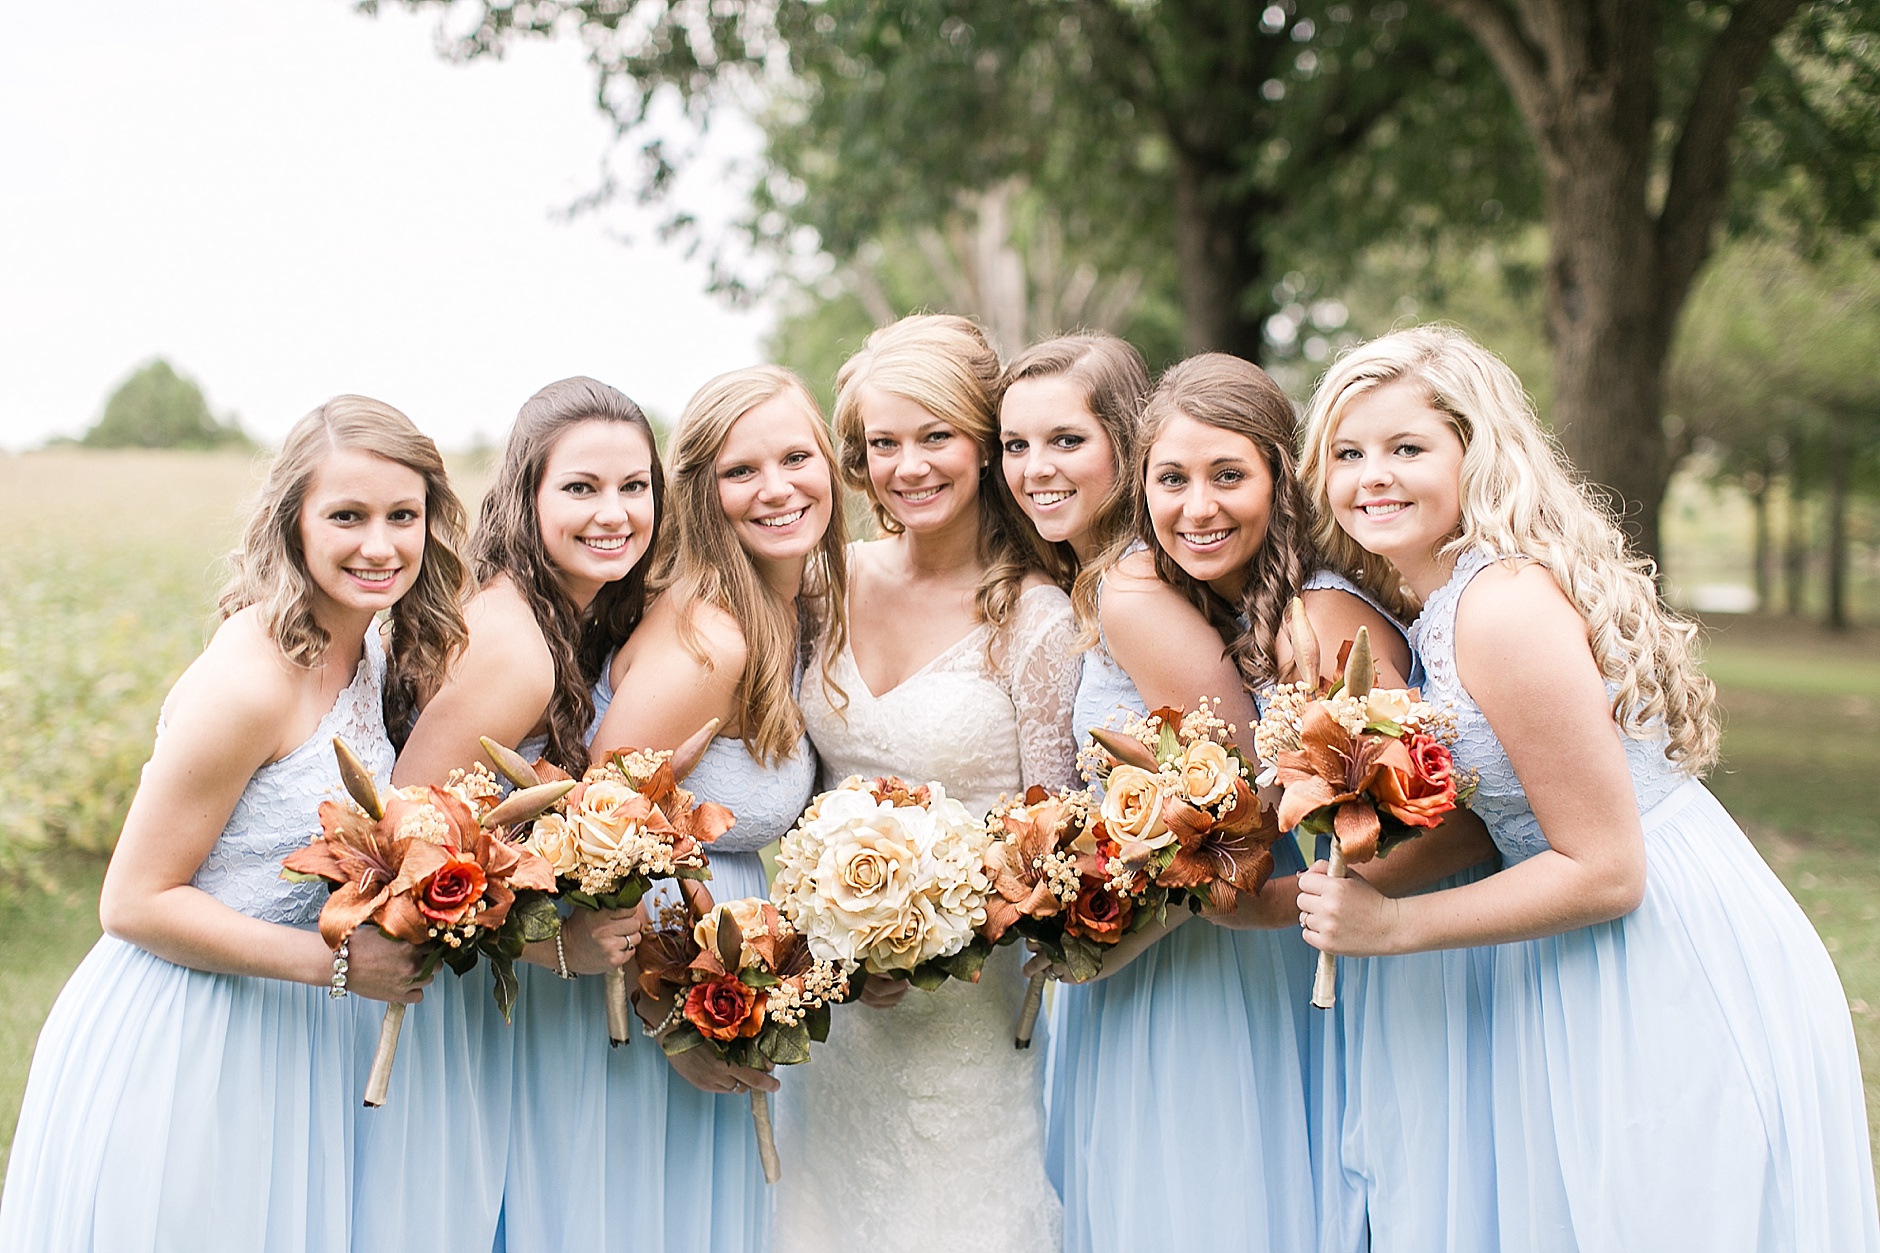 An Early Fall Navy and Blue Wedding in Clinton, Kentucky by Rachael Houser Photography